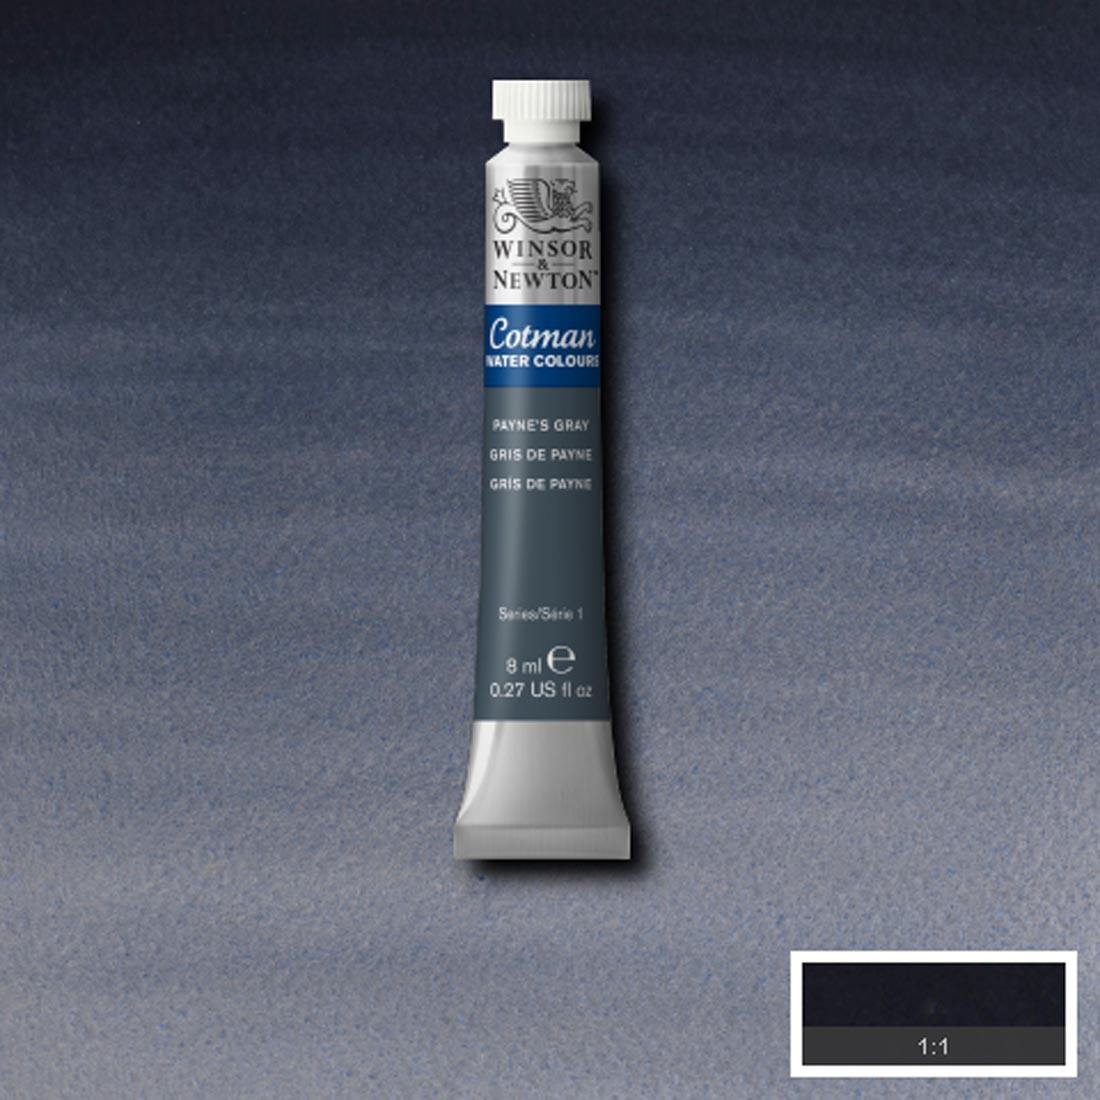 Tube of Payne's Gray Winsor and Newton Cotman Water Colour with a paint swatch for the background